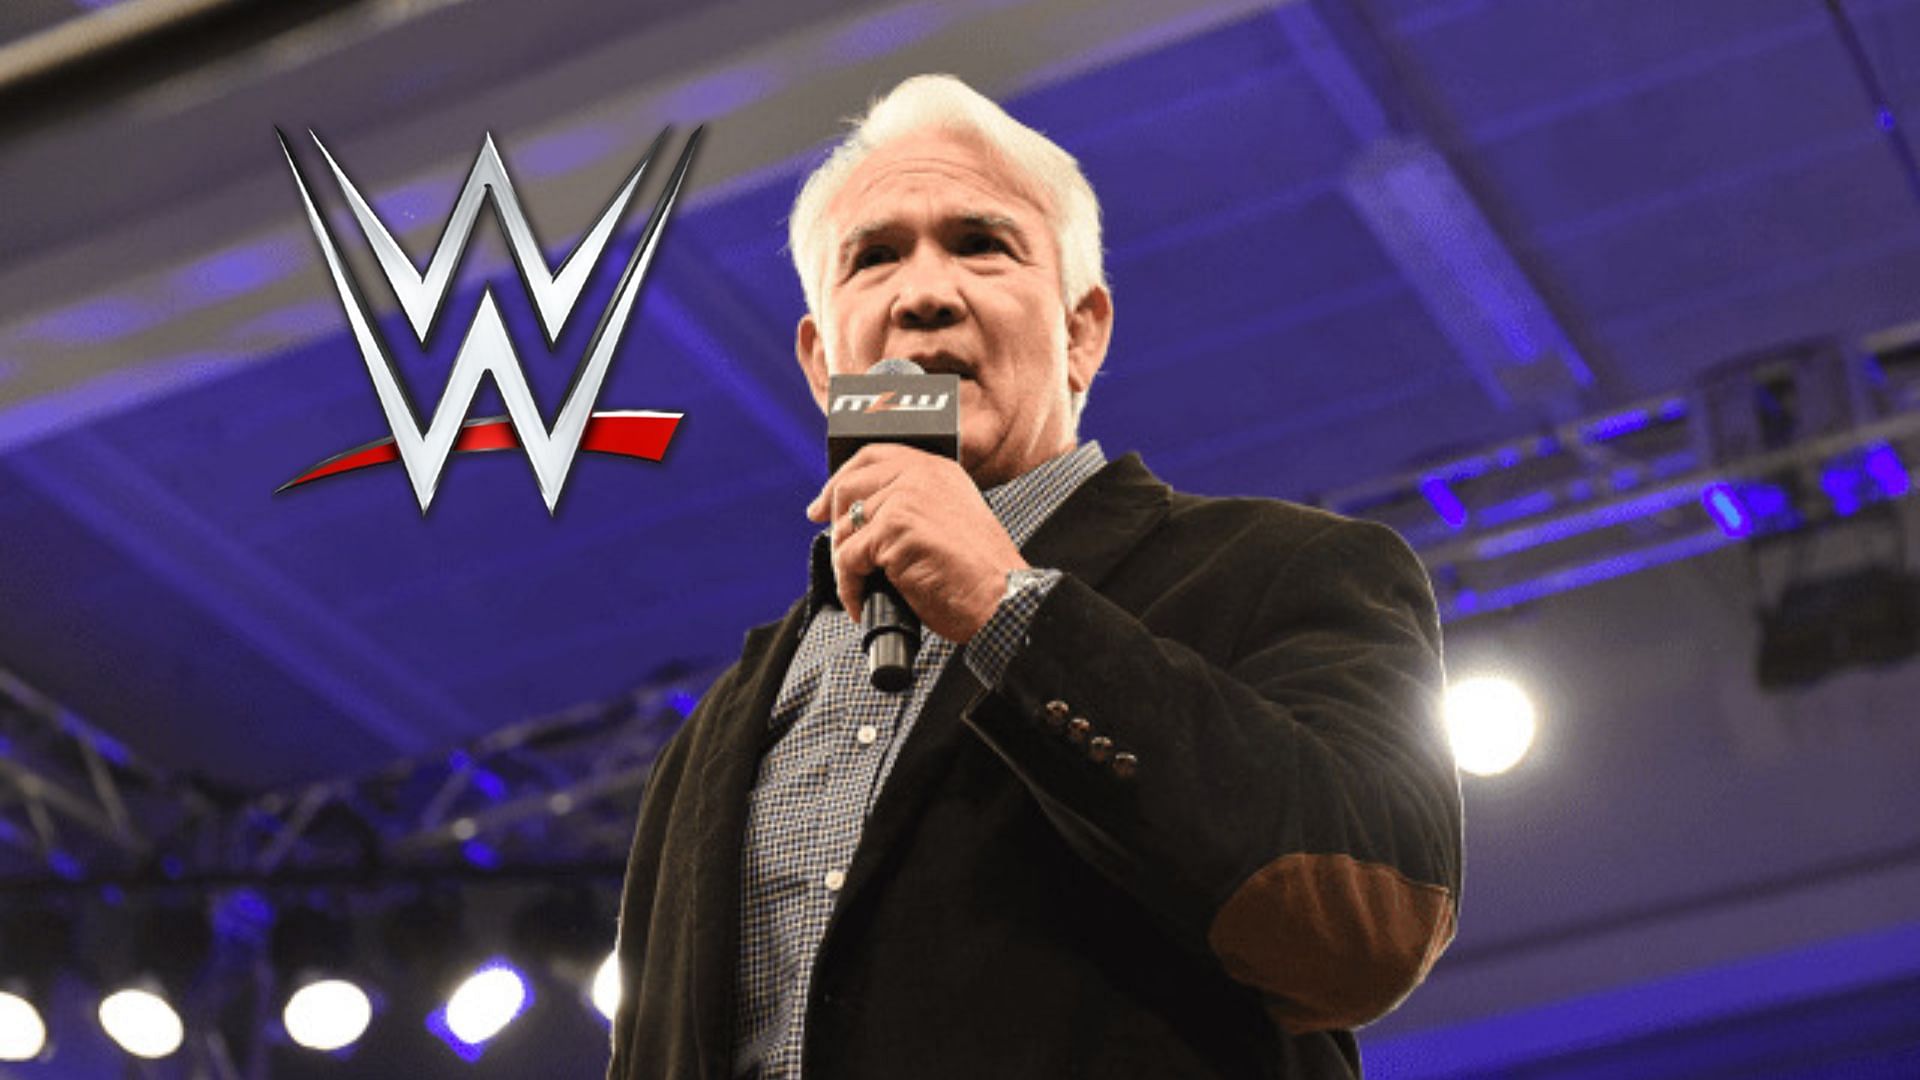 WWE Hall of Famer, Ricky Steamboat.